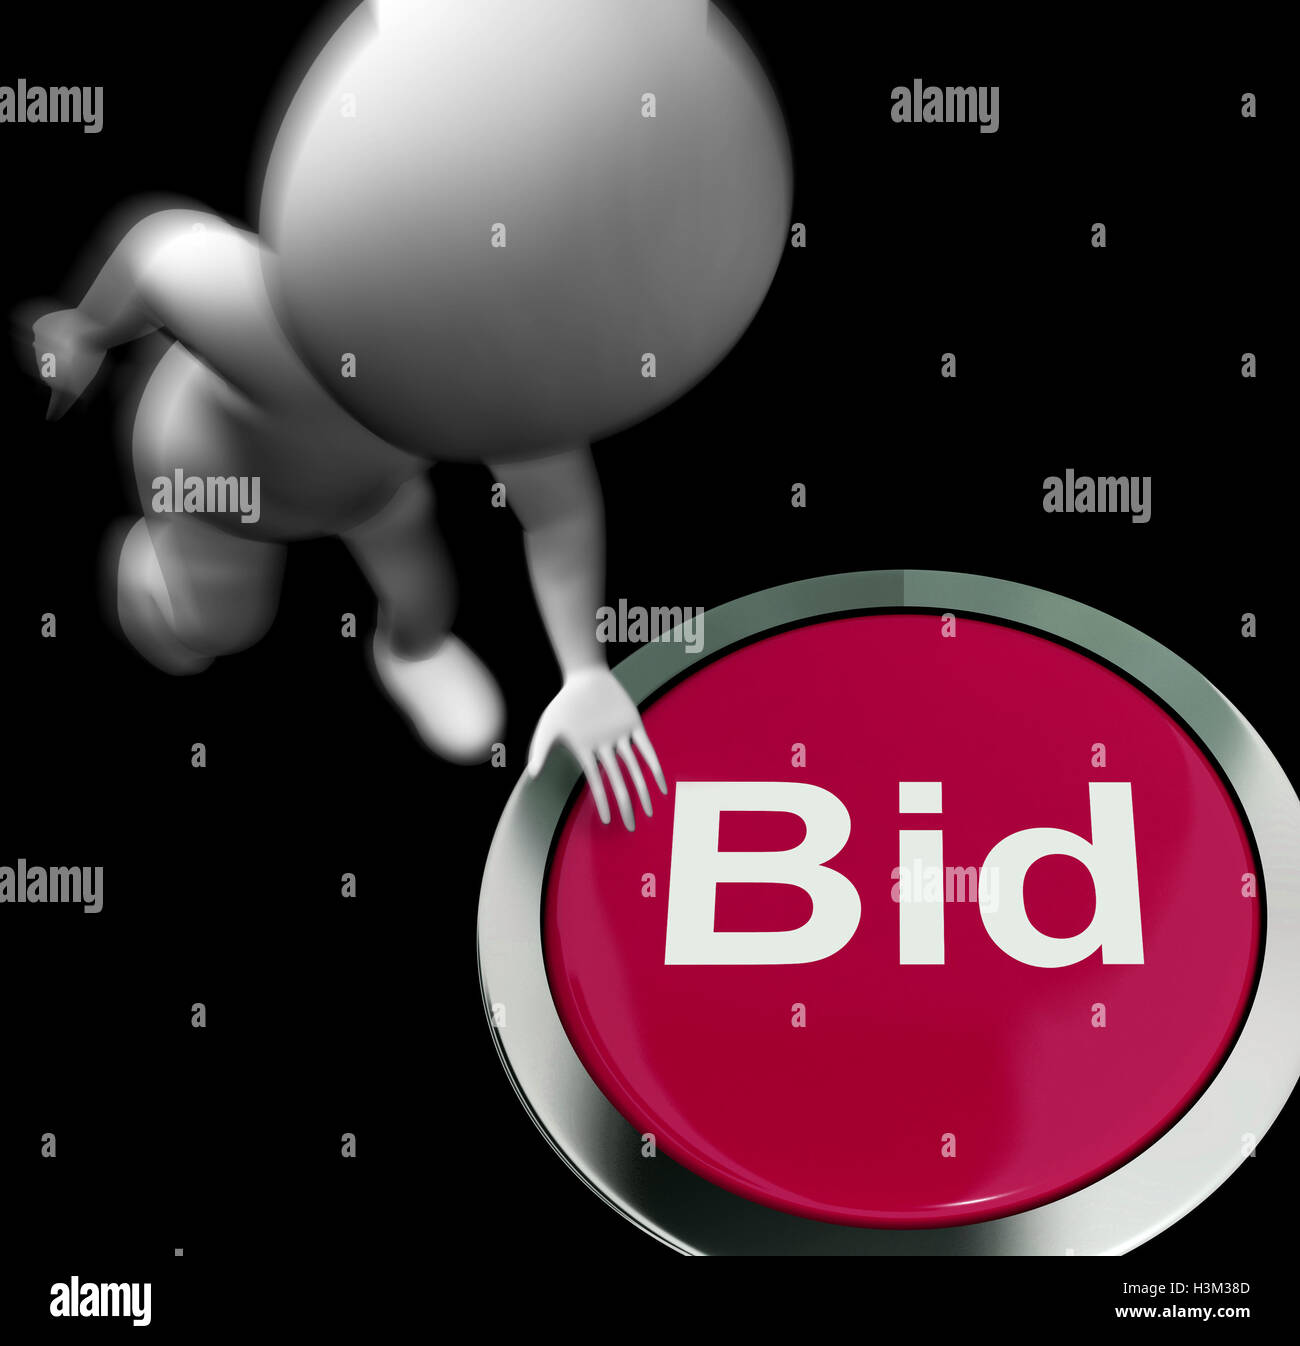 Bid Pressed Shows Auction Buying And Selling Stock Photo